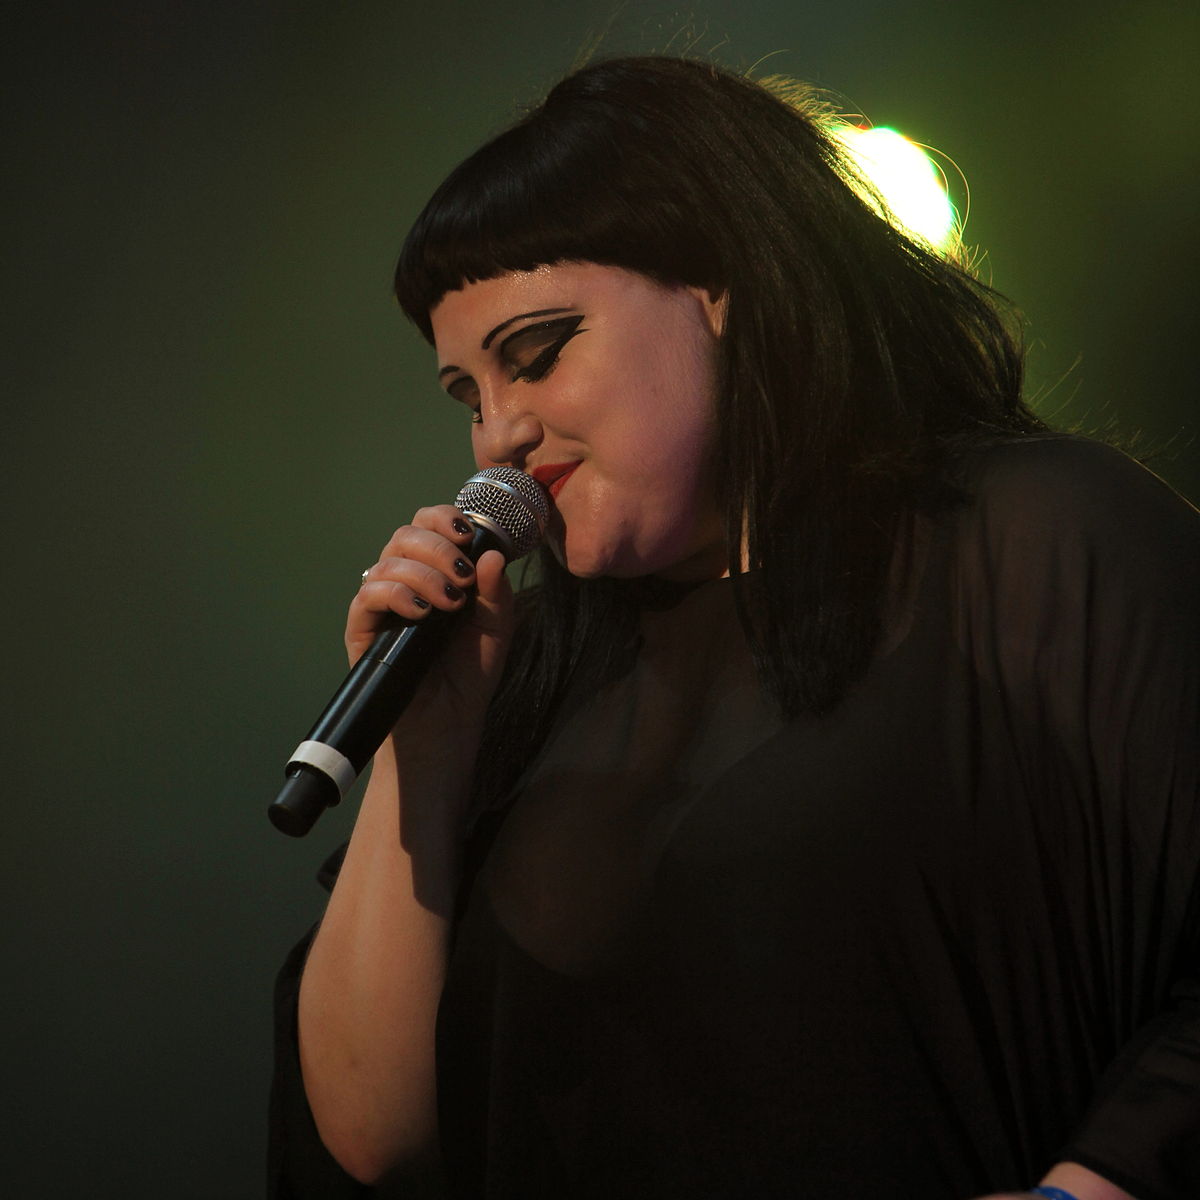 File:Beth Ditto IMG 5595.jpg - Wikimedia Commons.